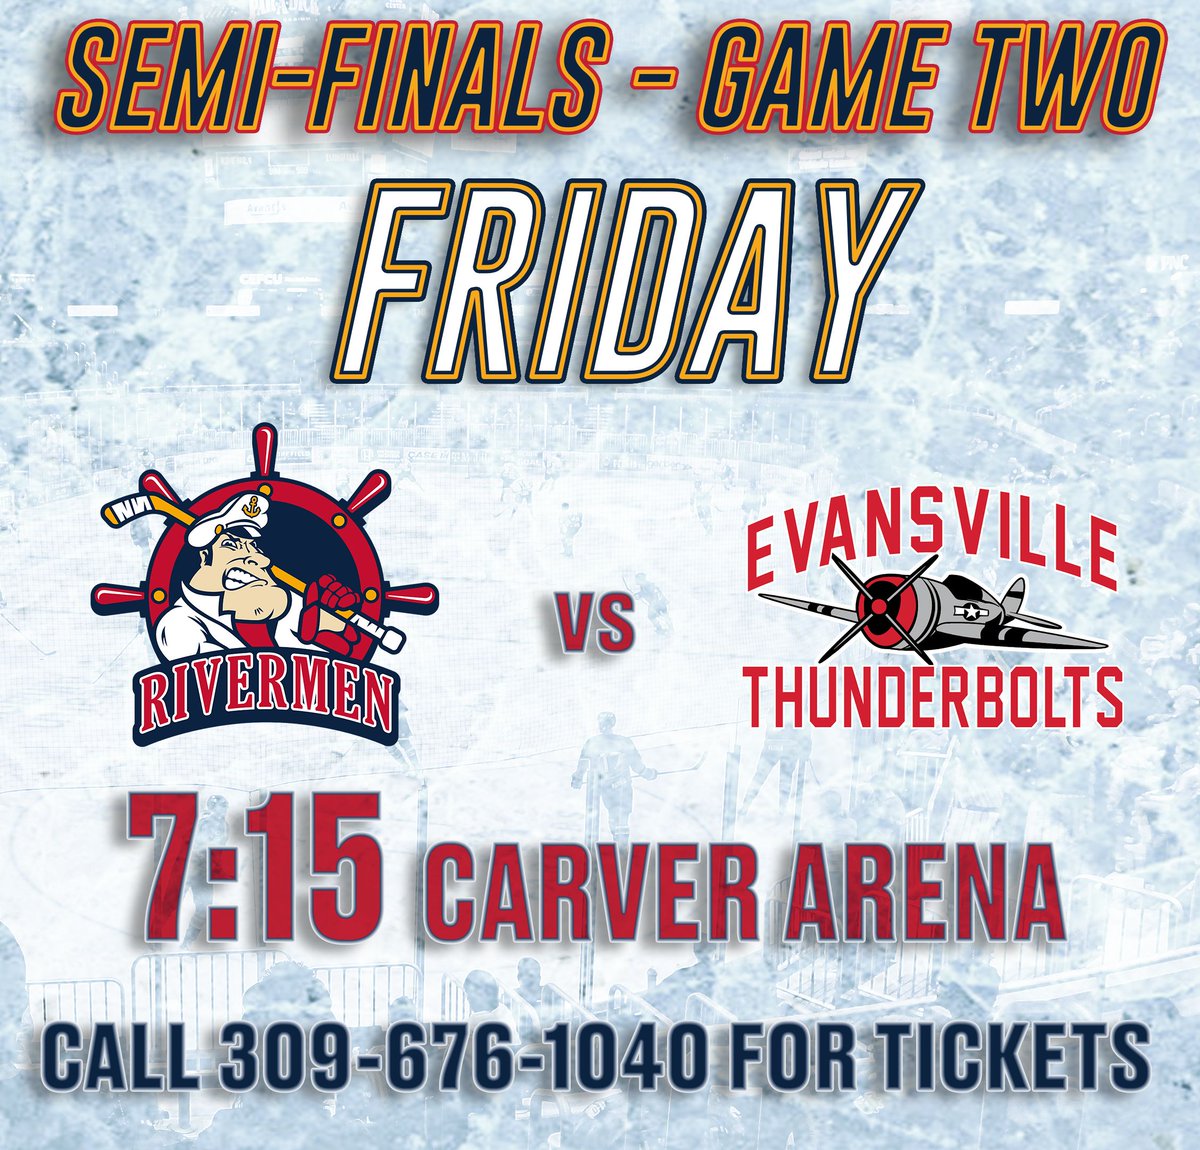 Game Two of the President's Cup Semifinal is TONIGHT!
Rivermen lead the best-of-three series 1-0...
Don't miss a moment of the action, call 309-676-1040 NOW!
#HoistTheColors